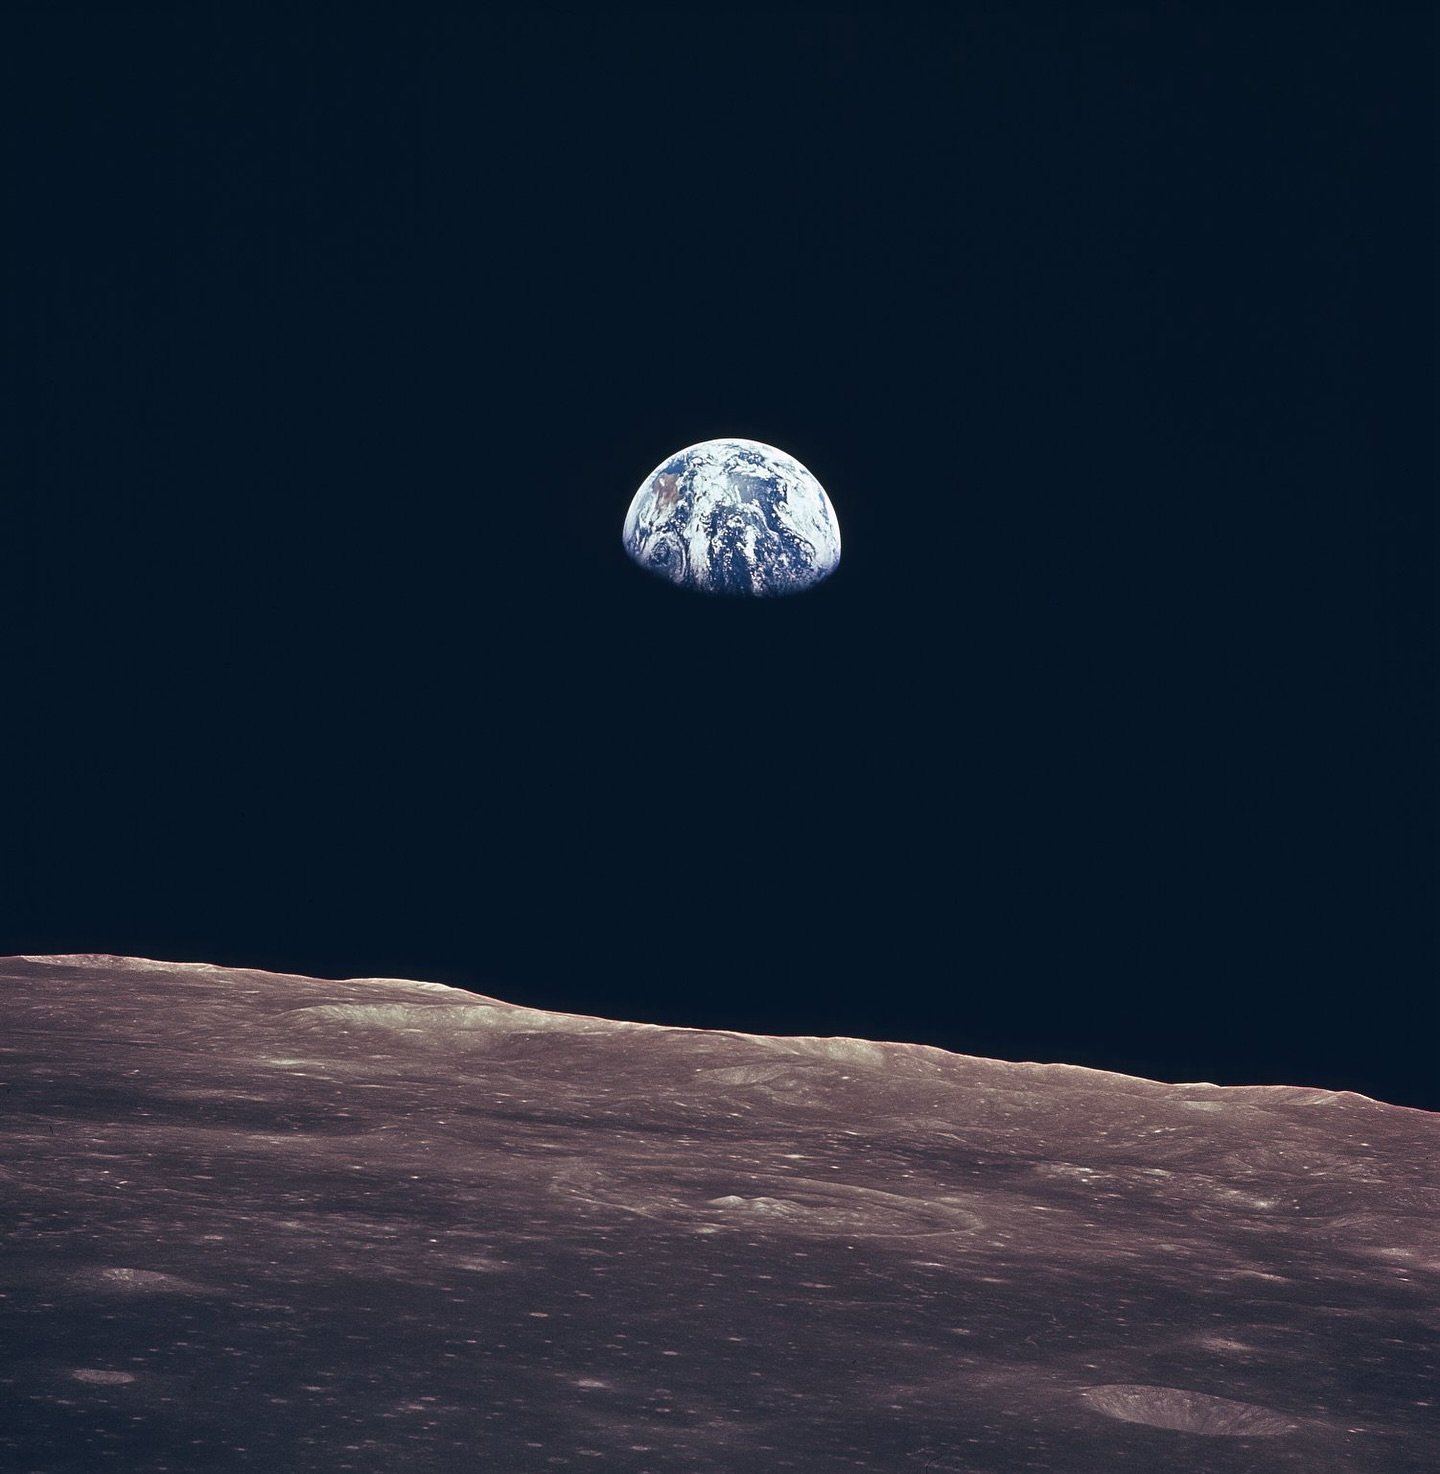 🌎🌍🌏 EARTH DAY 🌏🌎🌍 Image of Earth Rise taken during lunar orbit, 1969. Published in our Biodiversity Issue (FW21)

Earth Rise as Seen From Lunar Surface. This incredible image of the Earth rise was 
taken during lunar orbit by the Apollo 11 mis